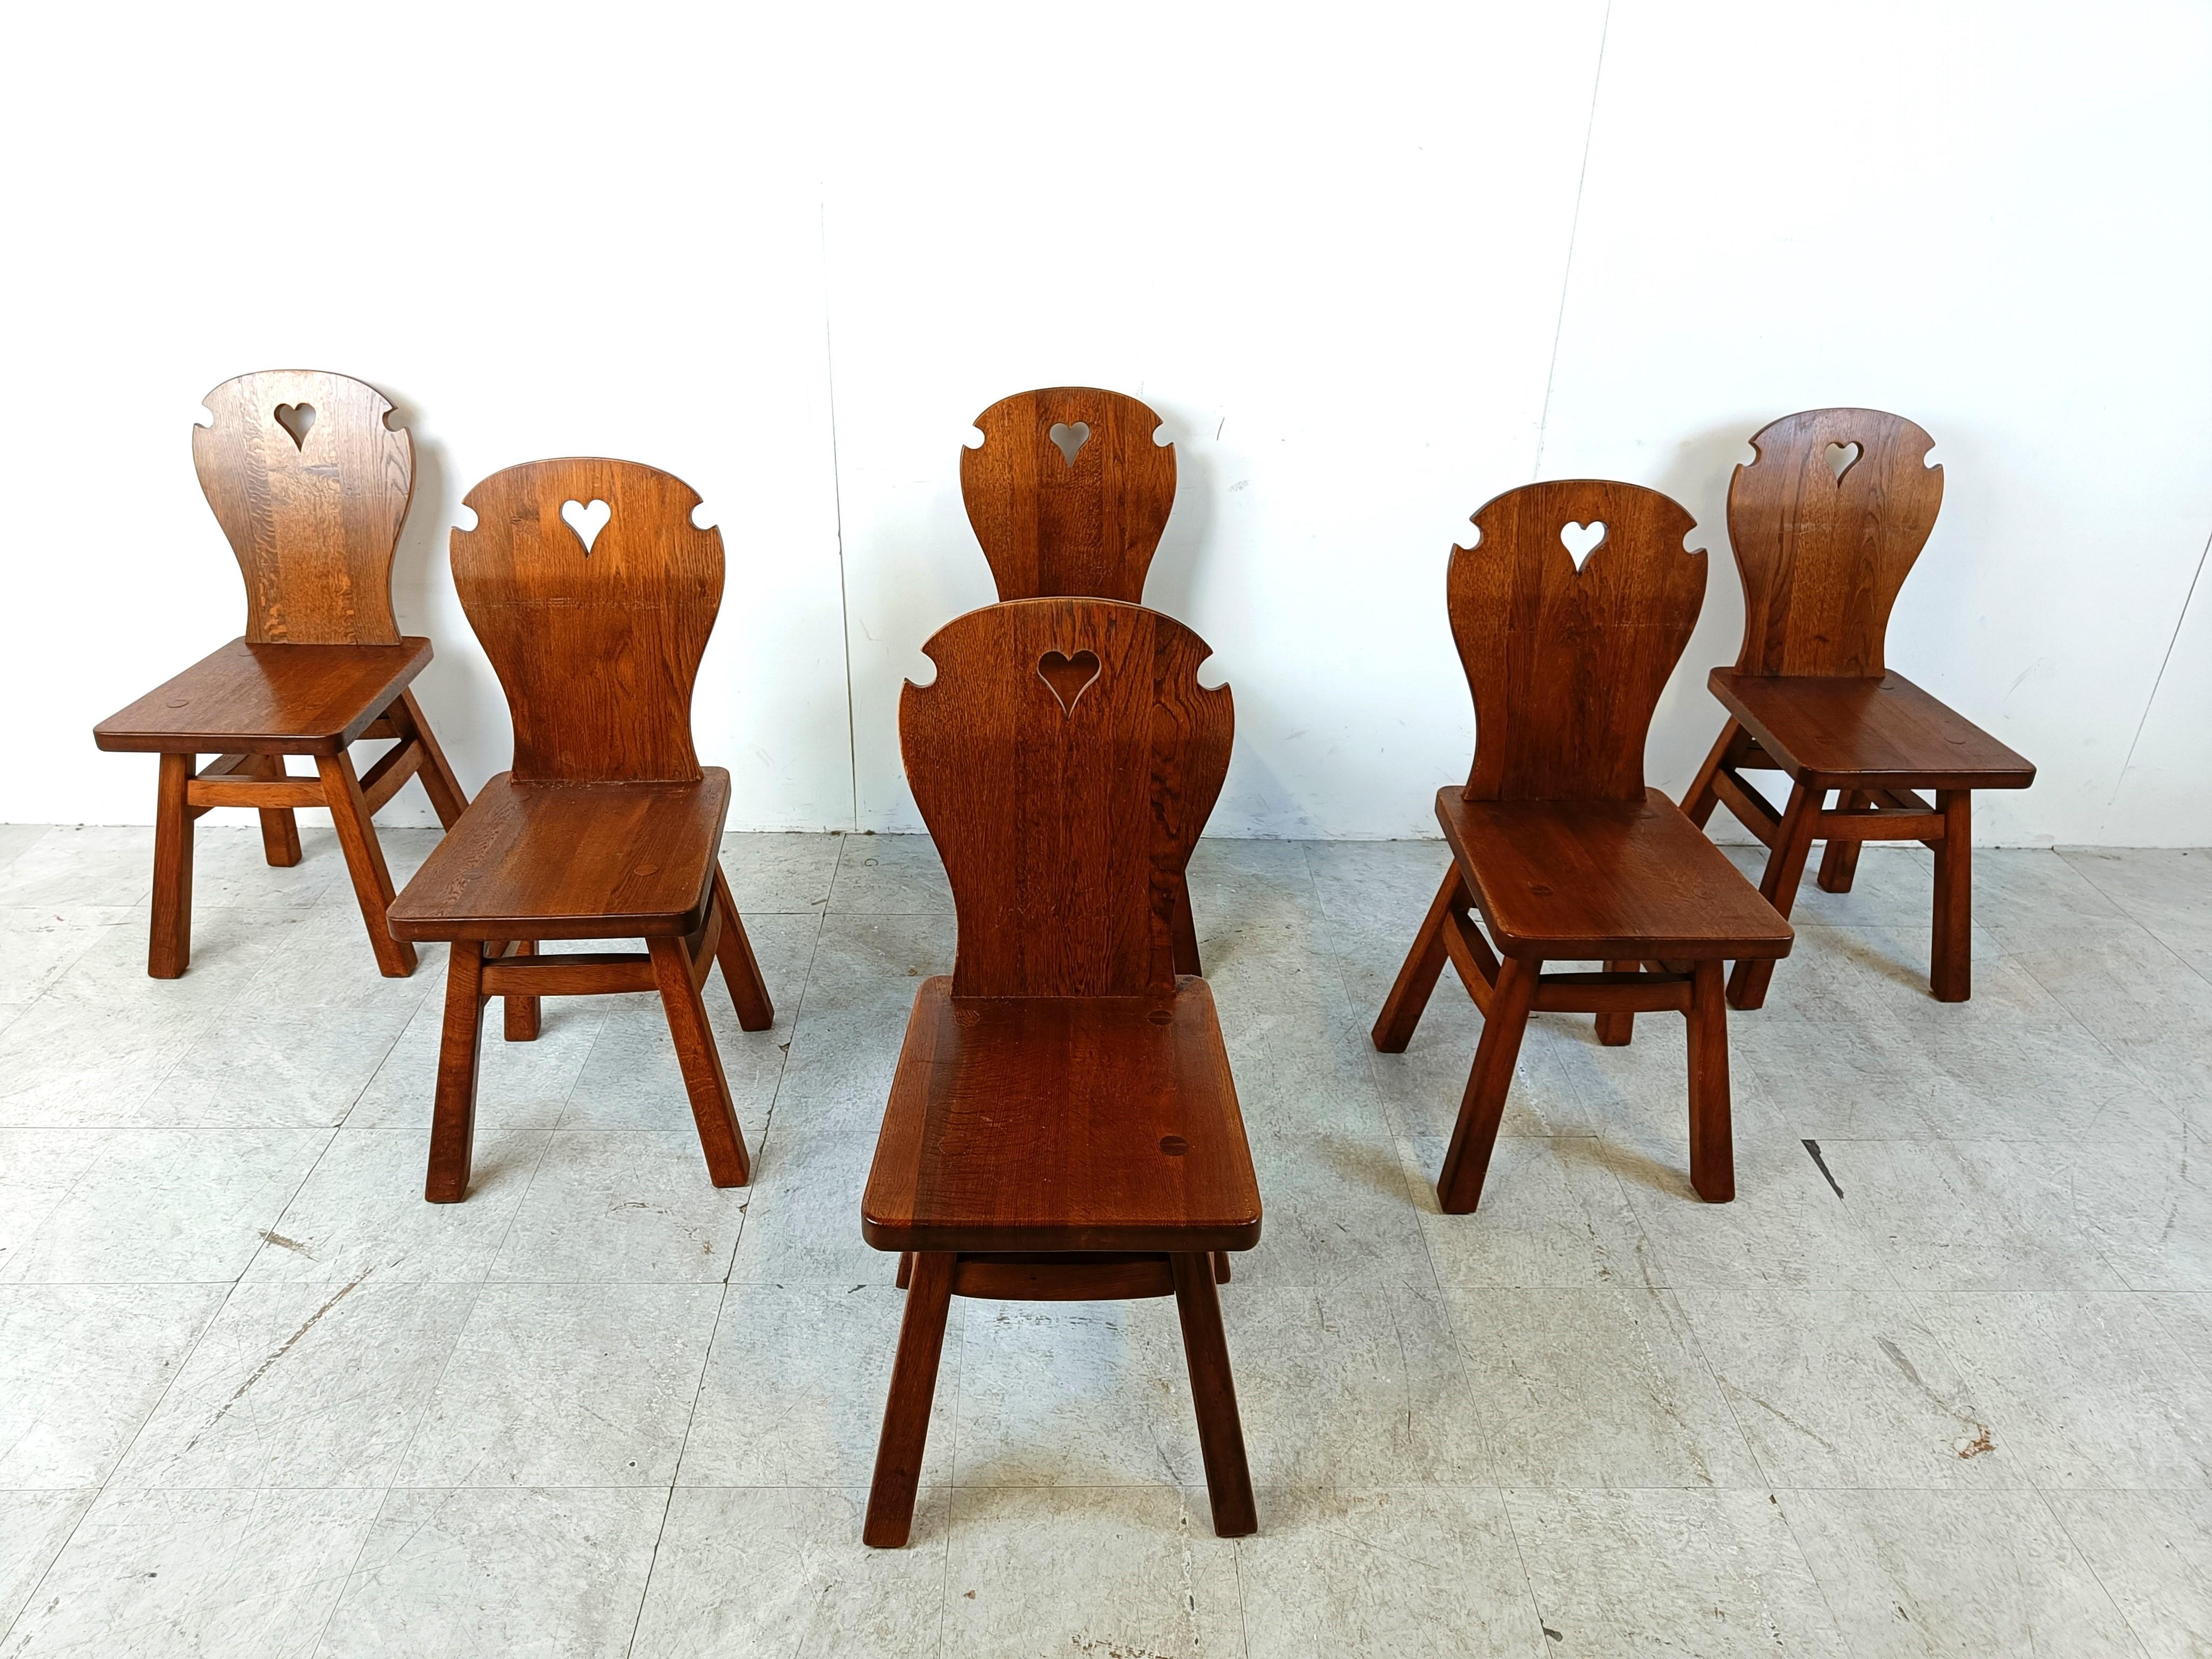 Mid century solid wooden  brutalist dining chairs.

Nice rustic design with heartt shaped cutouts in the back.

Very sturdy chairs

Good original condition.

1960s - Sweden

Dimensions:
Height: 90cm
Seat height: 45cm
Width: 40cm
Depth: 45cm

Ref.: